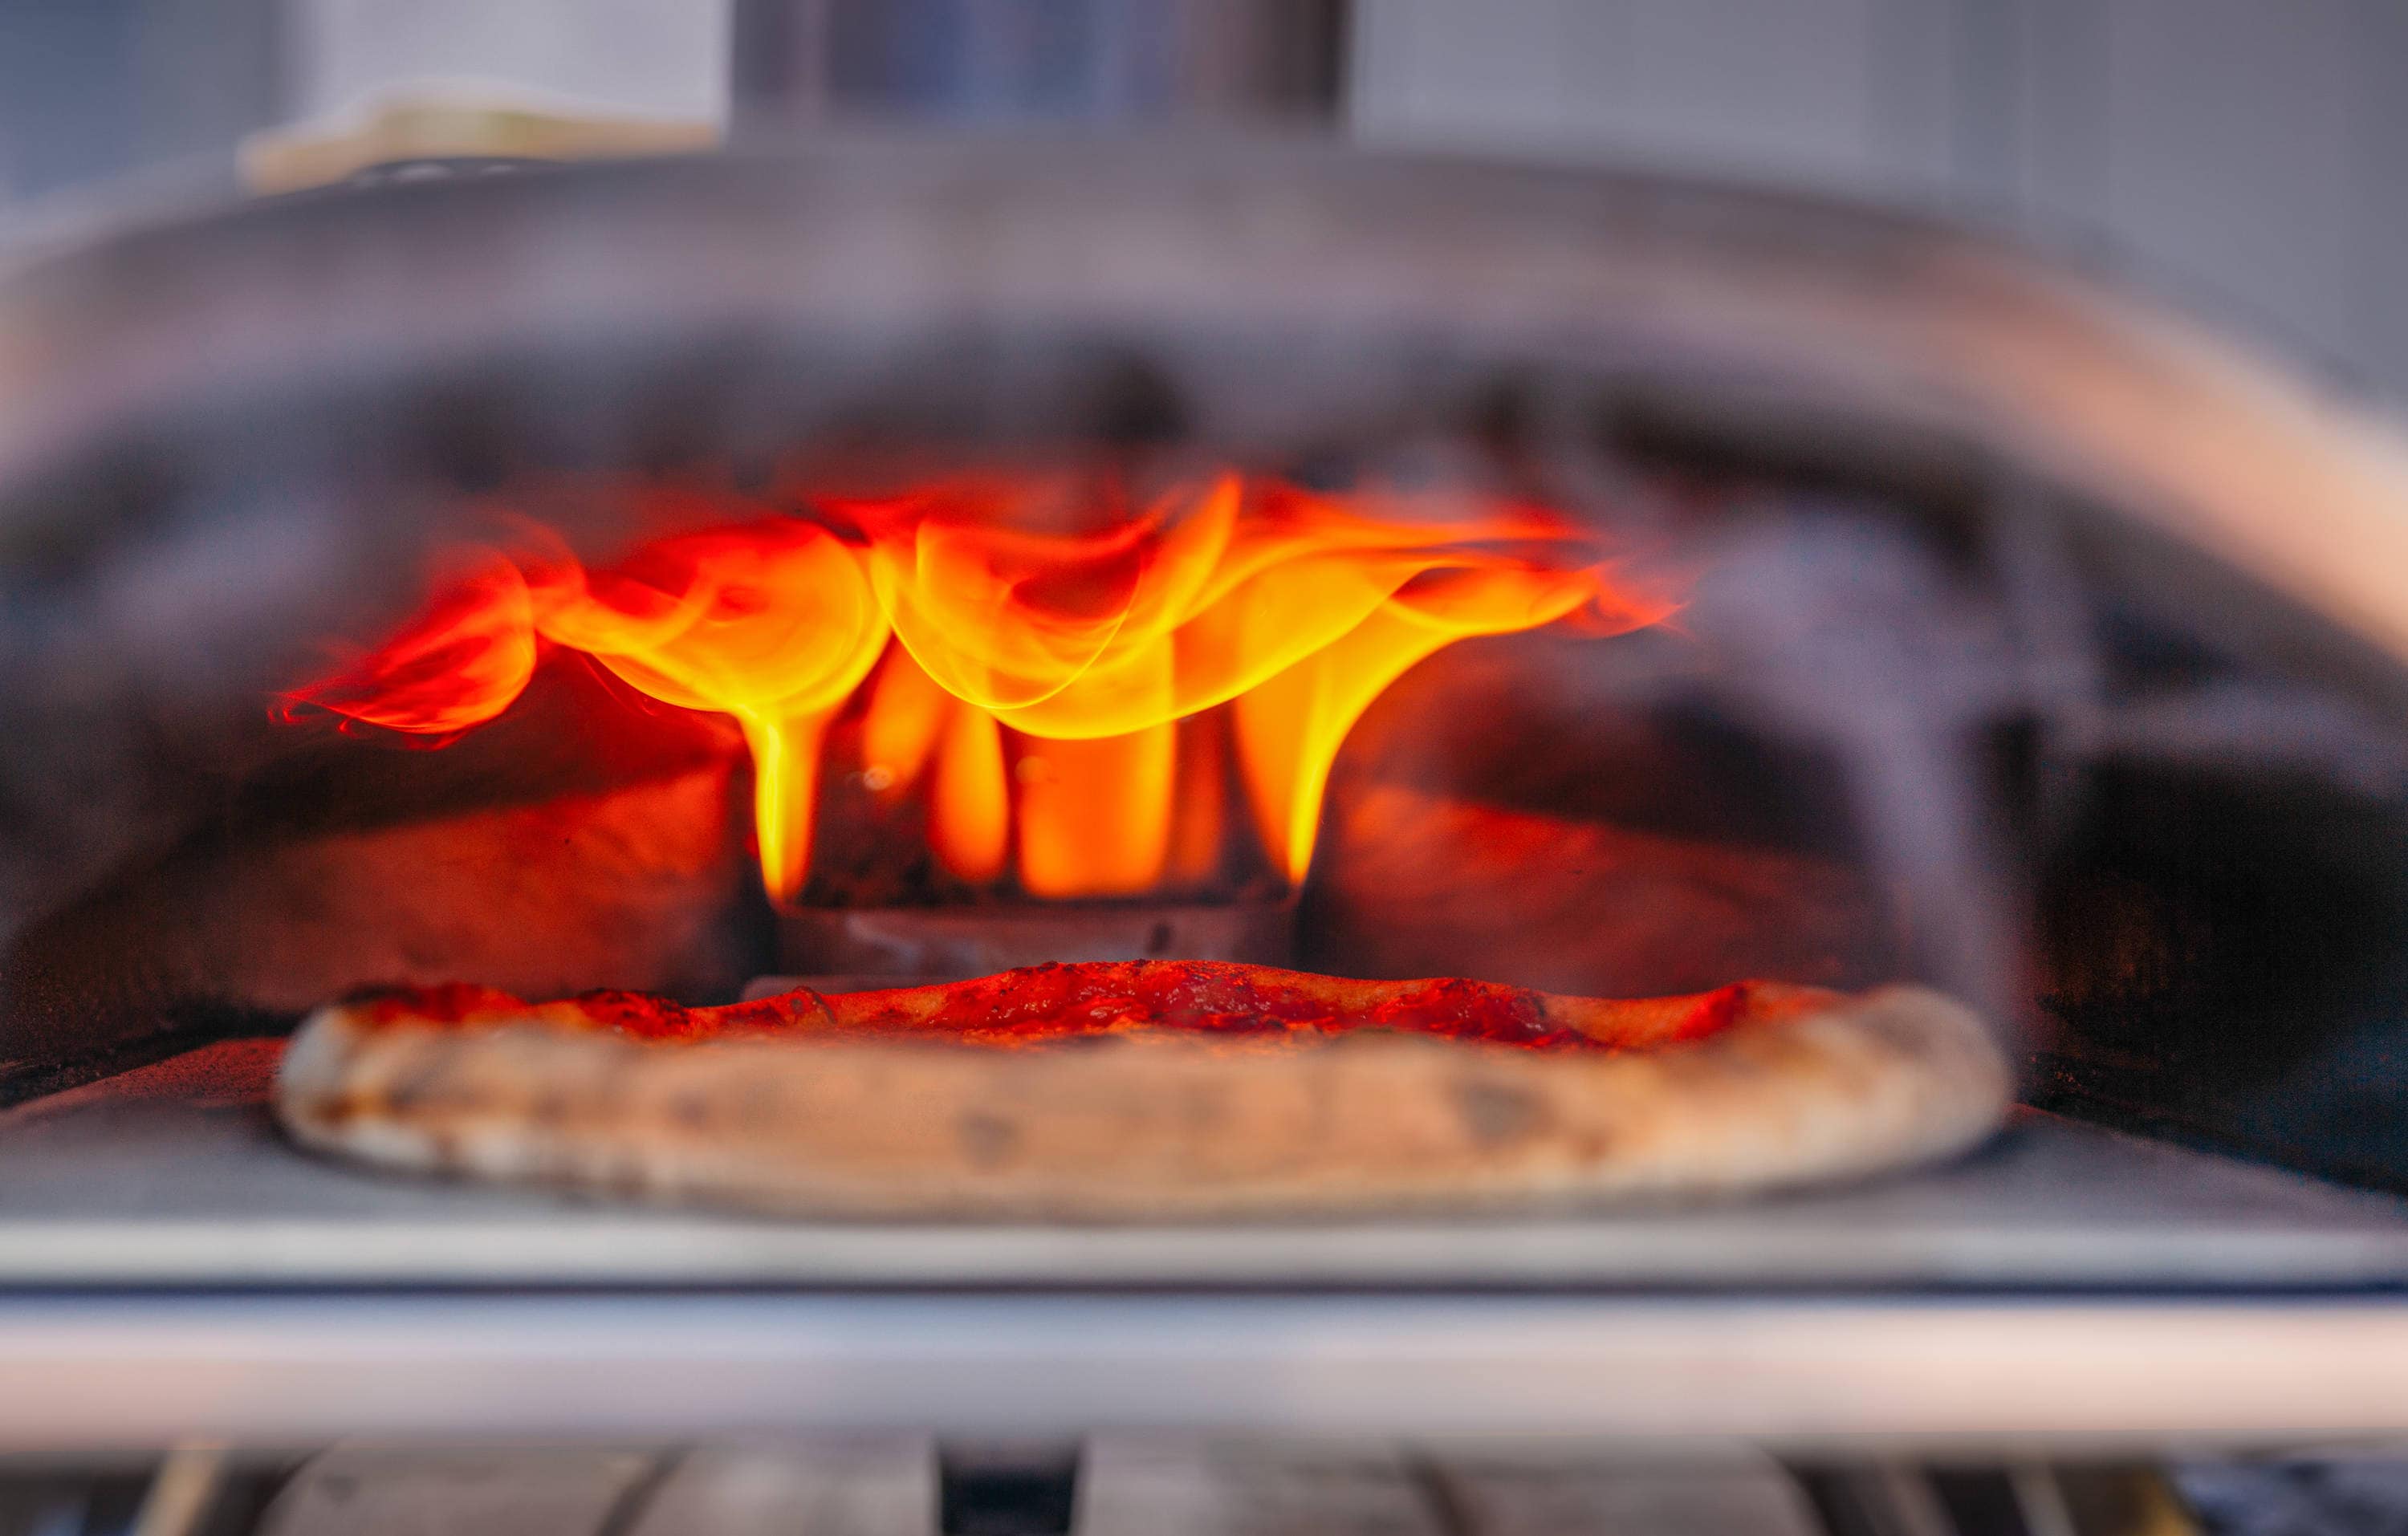 How Hot Should A Pizza Oven Be? – HEARTH & FIRE™ Pizza